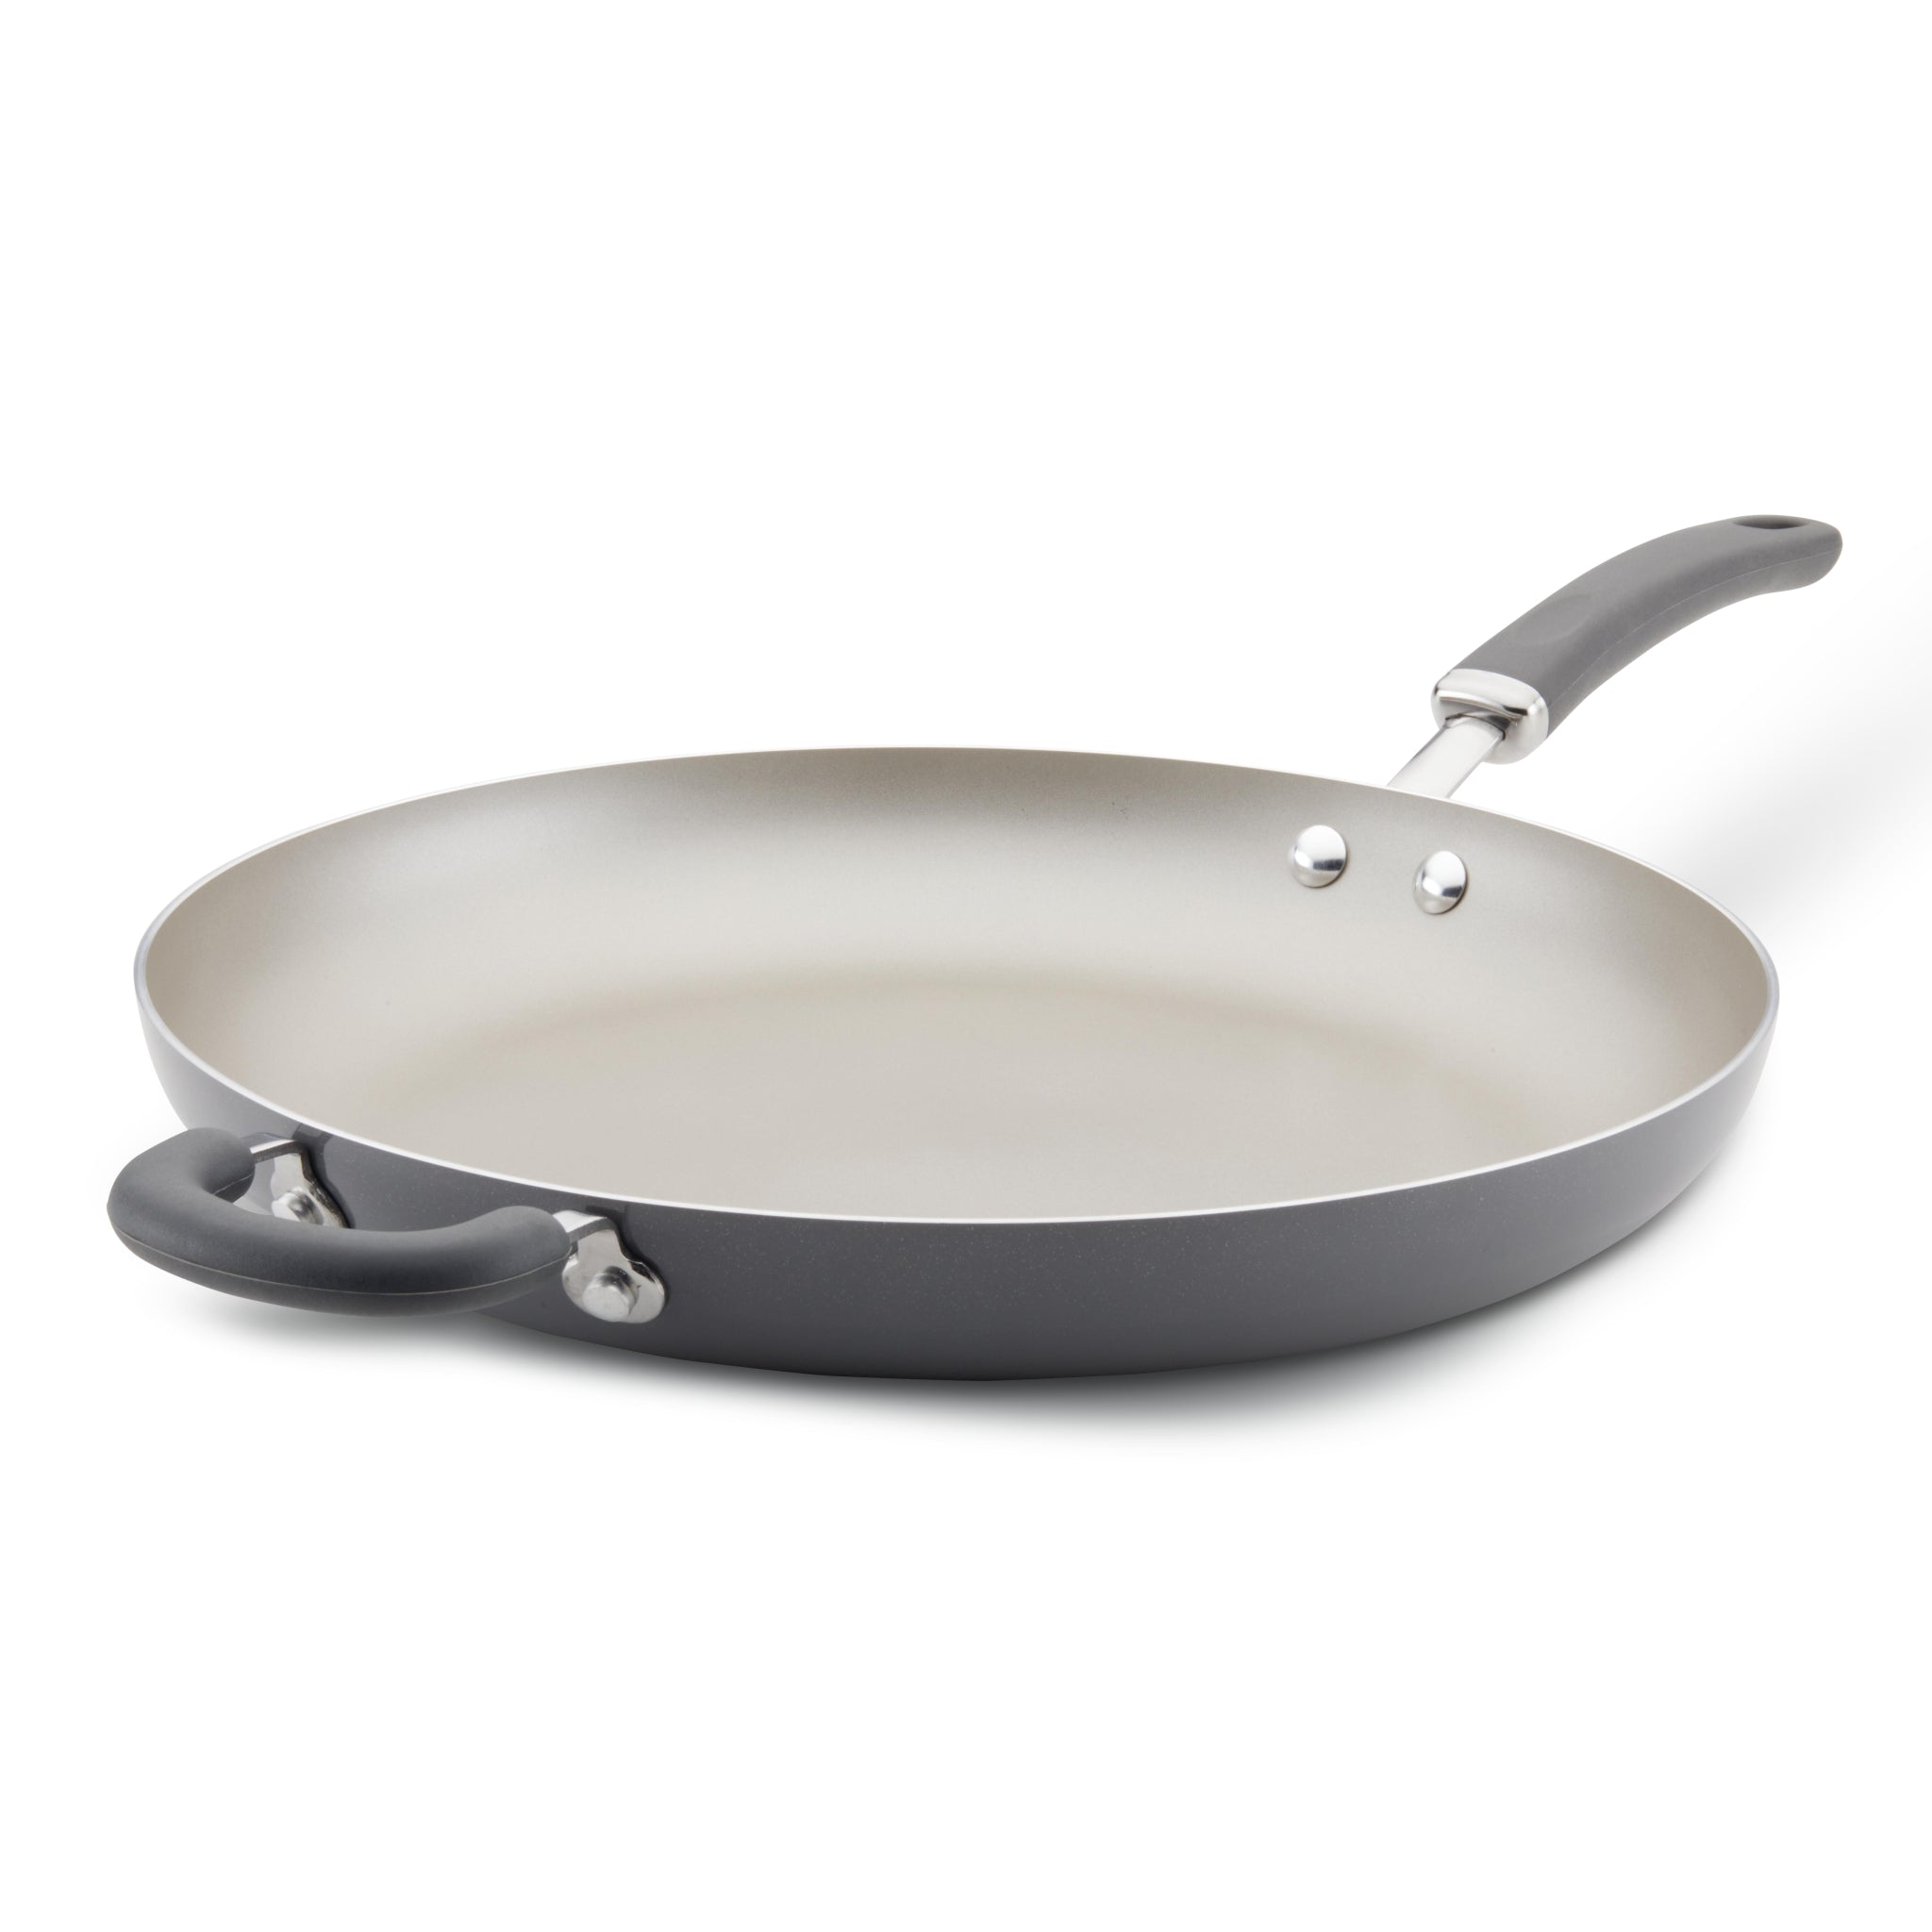 14-Inch Frying Pan Hard Anodized Nonstick with Helper Handle